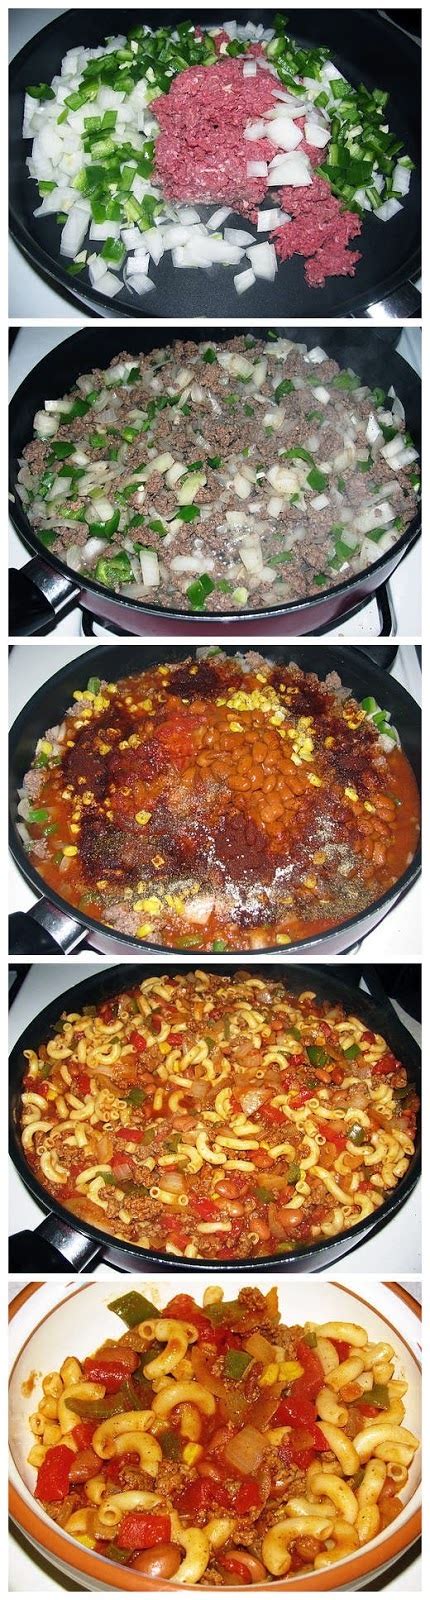 texas-ranch-style-stew-boutique-recipes-blogger image